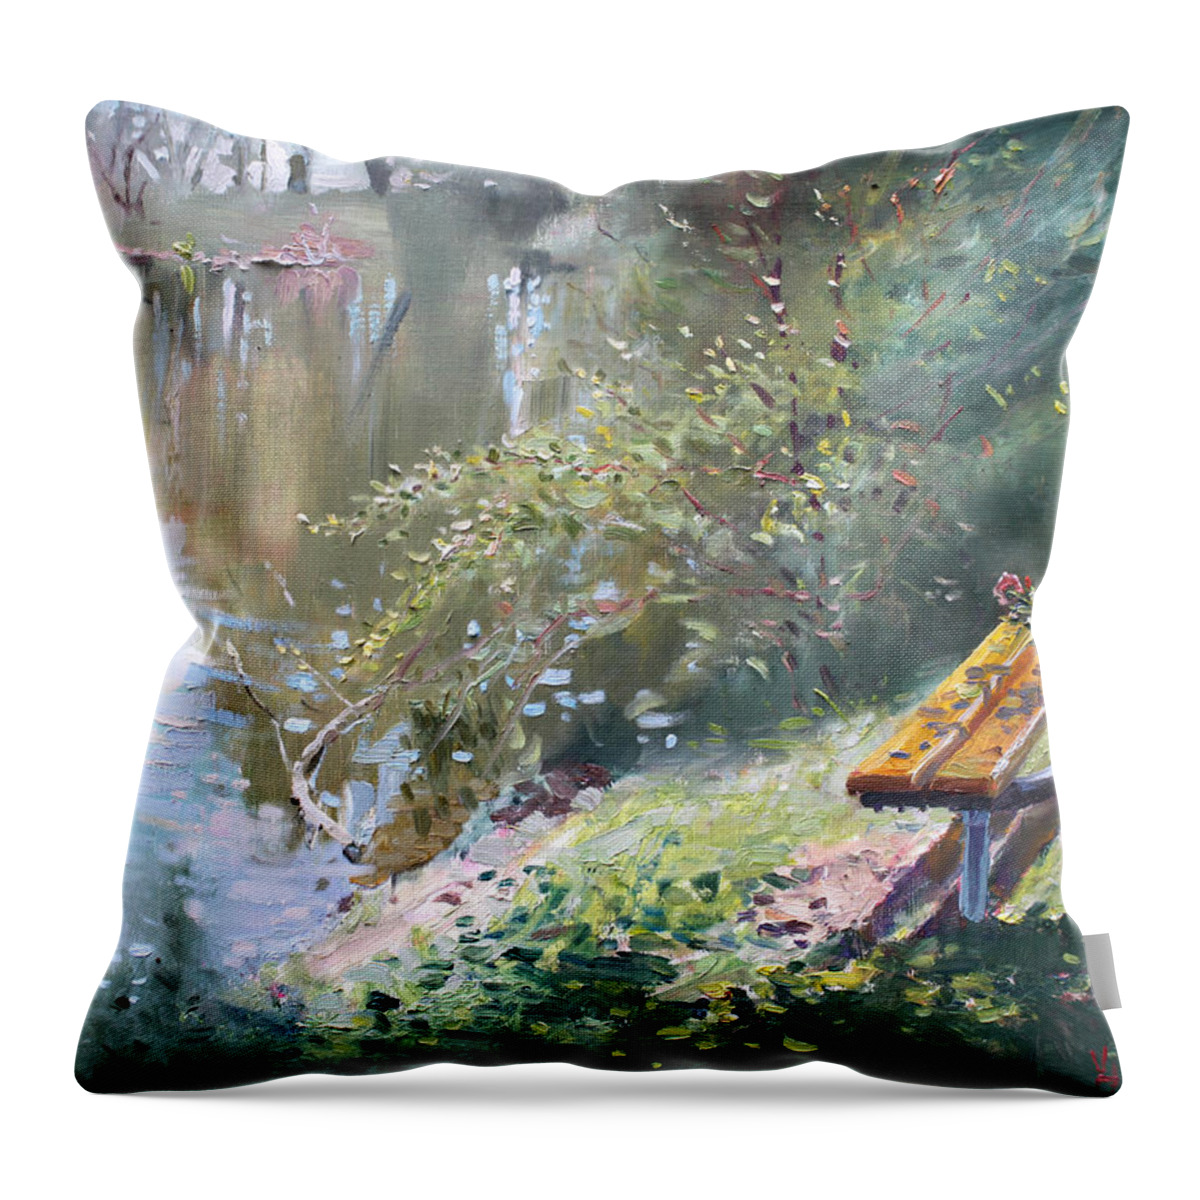 Lake Shore Throw Pillow featuring the painting A rose on the Bench by Ylli Haruni